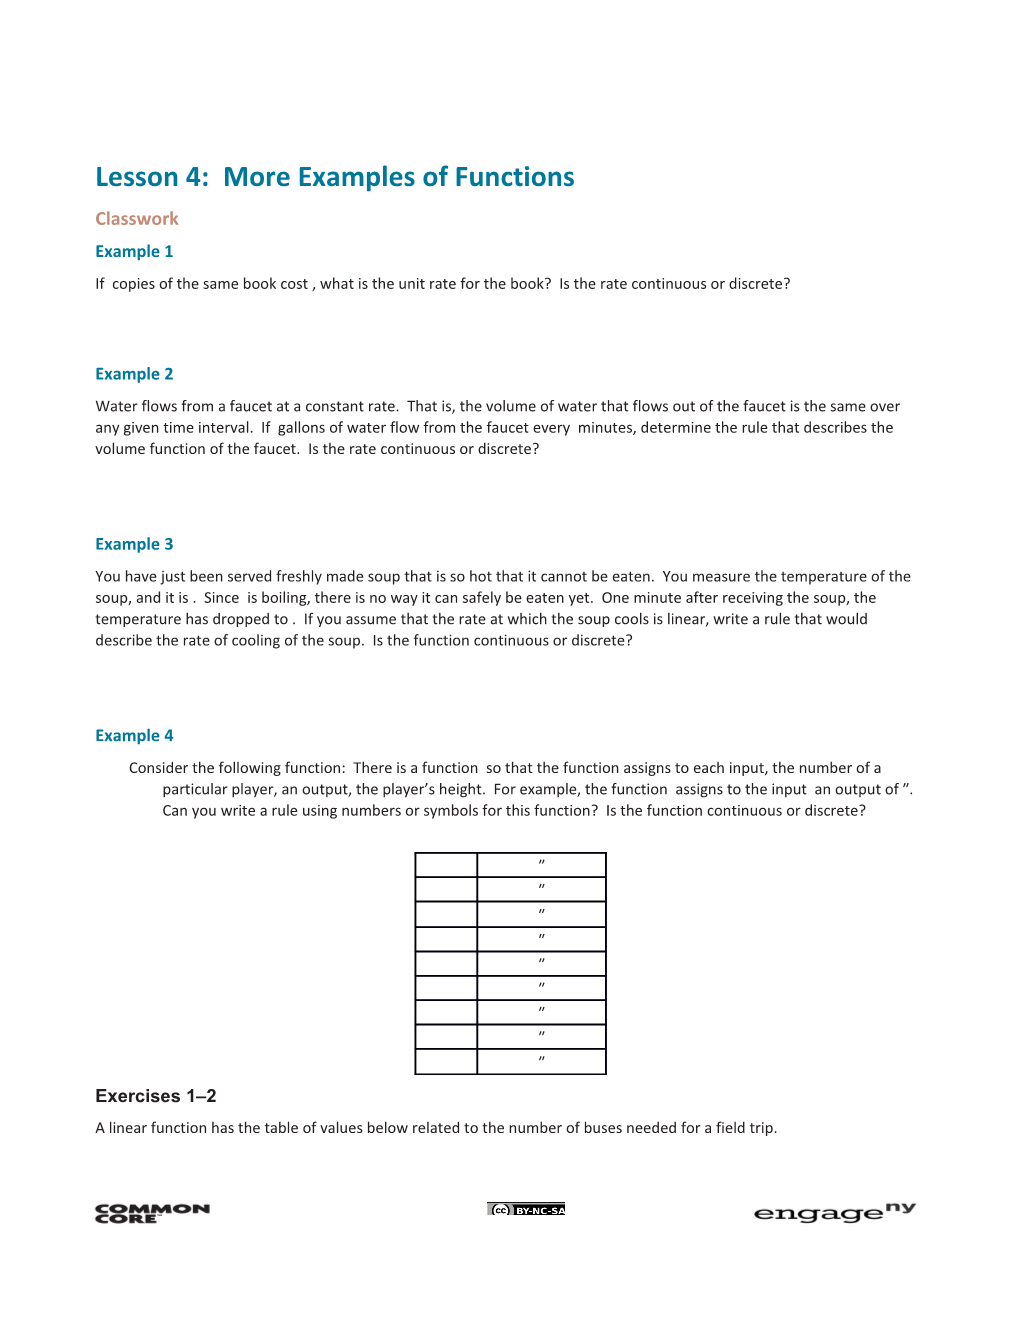 Lesson 4: More Examples of Functions